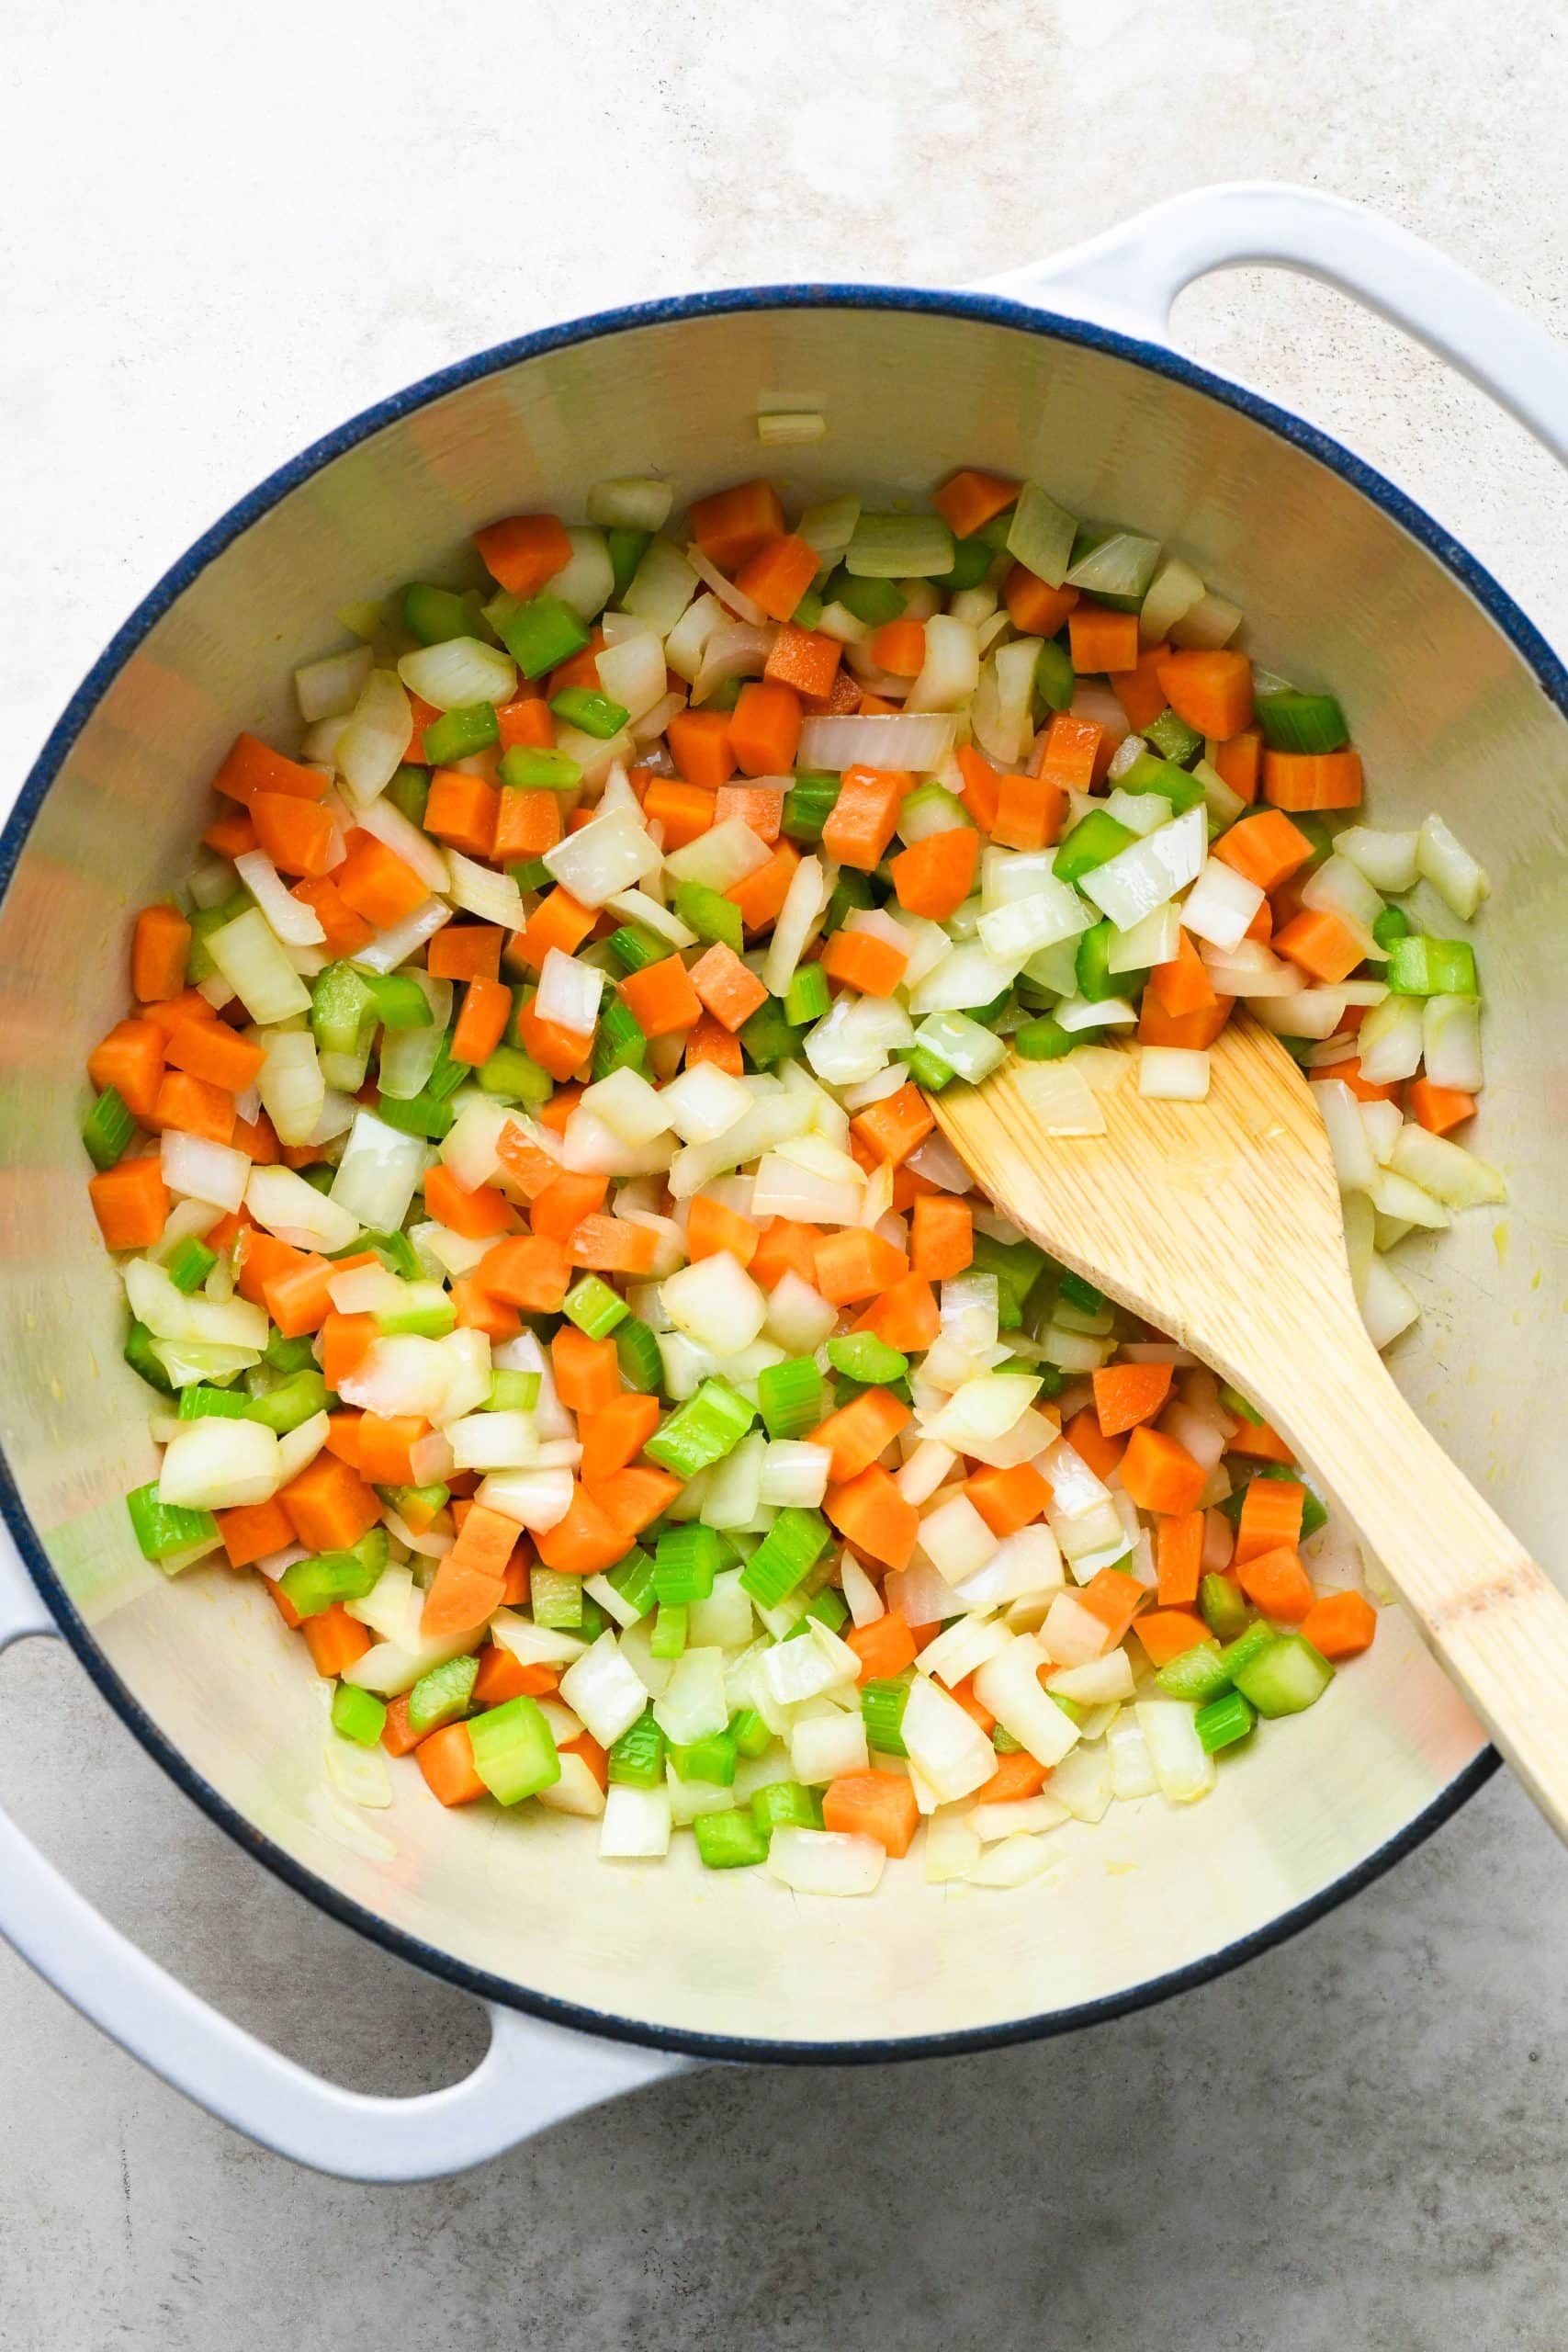 How to make shepherds pie soup: Sautéing onions, celery, and carrots in a large soup pot with olive oil. 